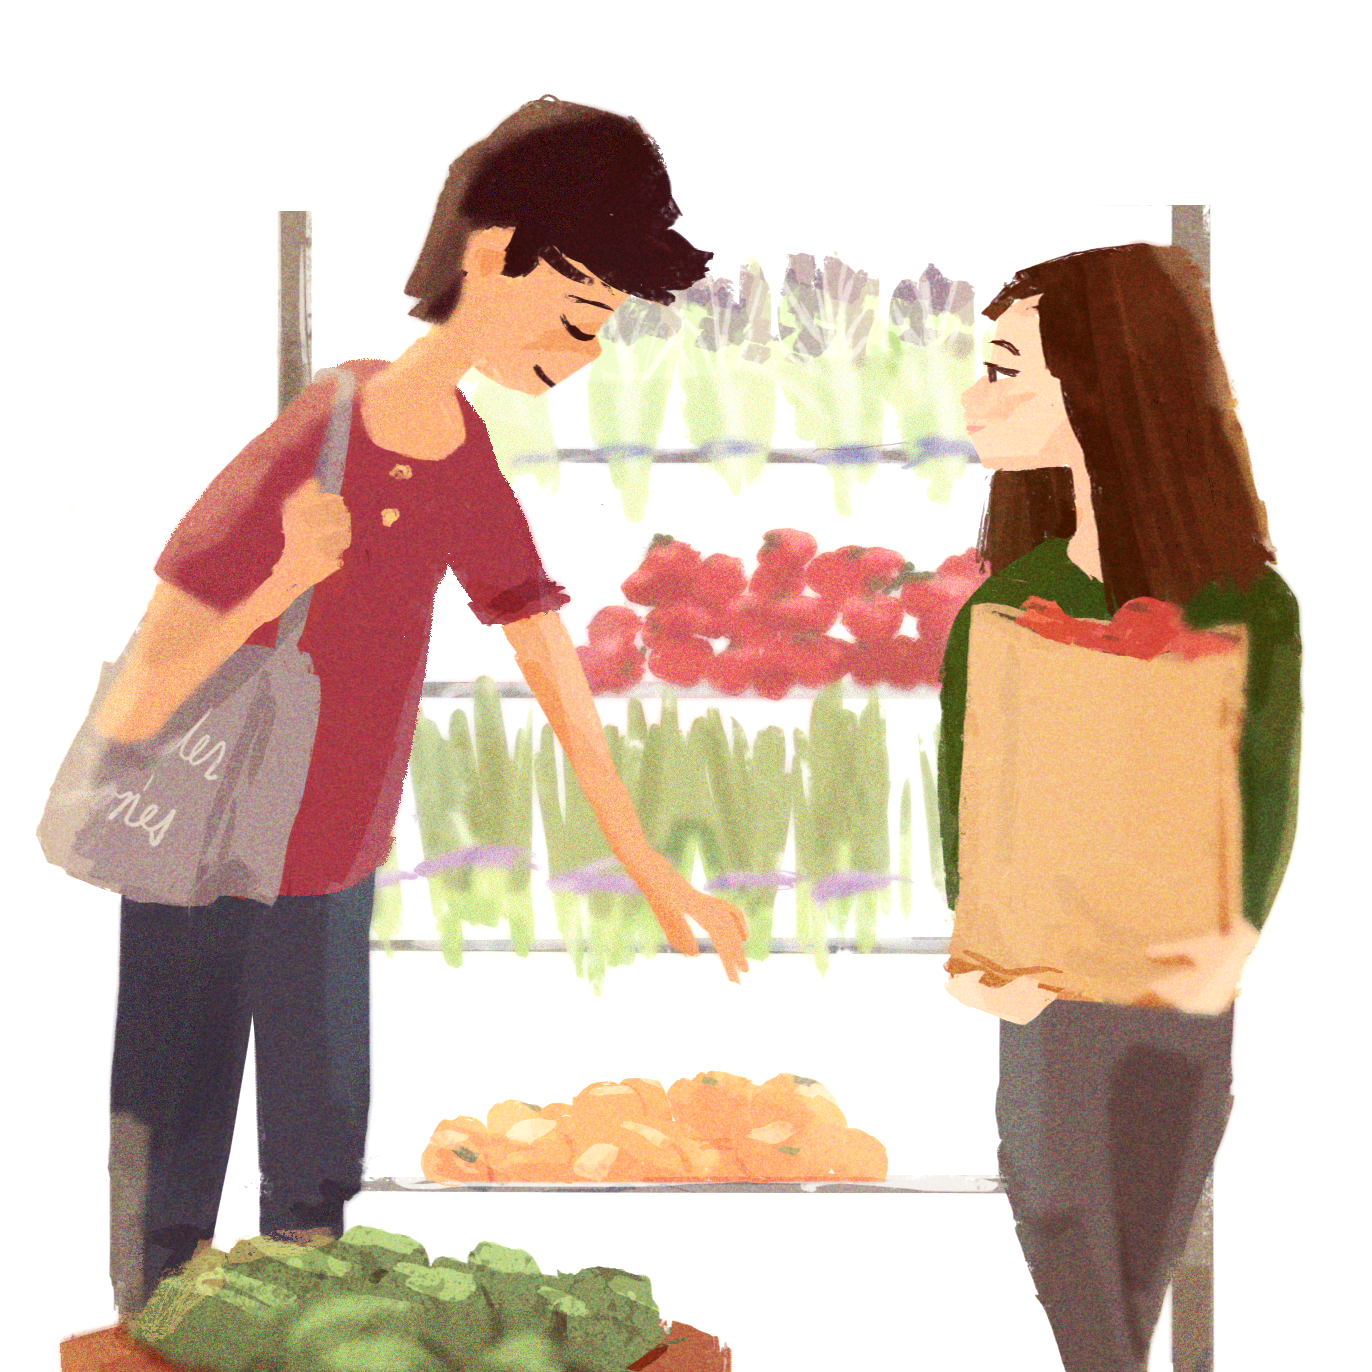 From Garden to Pantry. Illustration by George Geng.